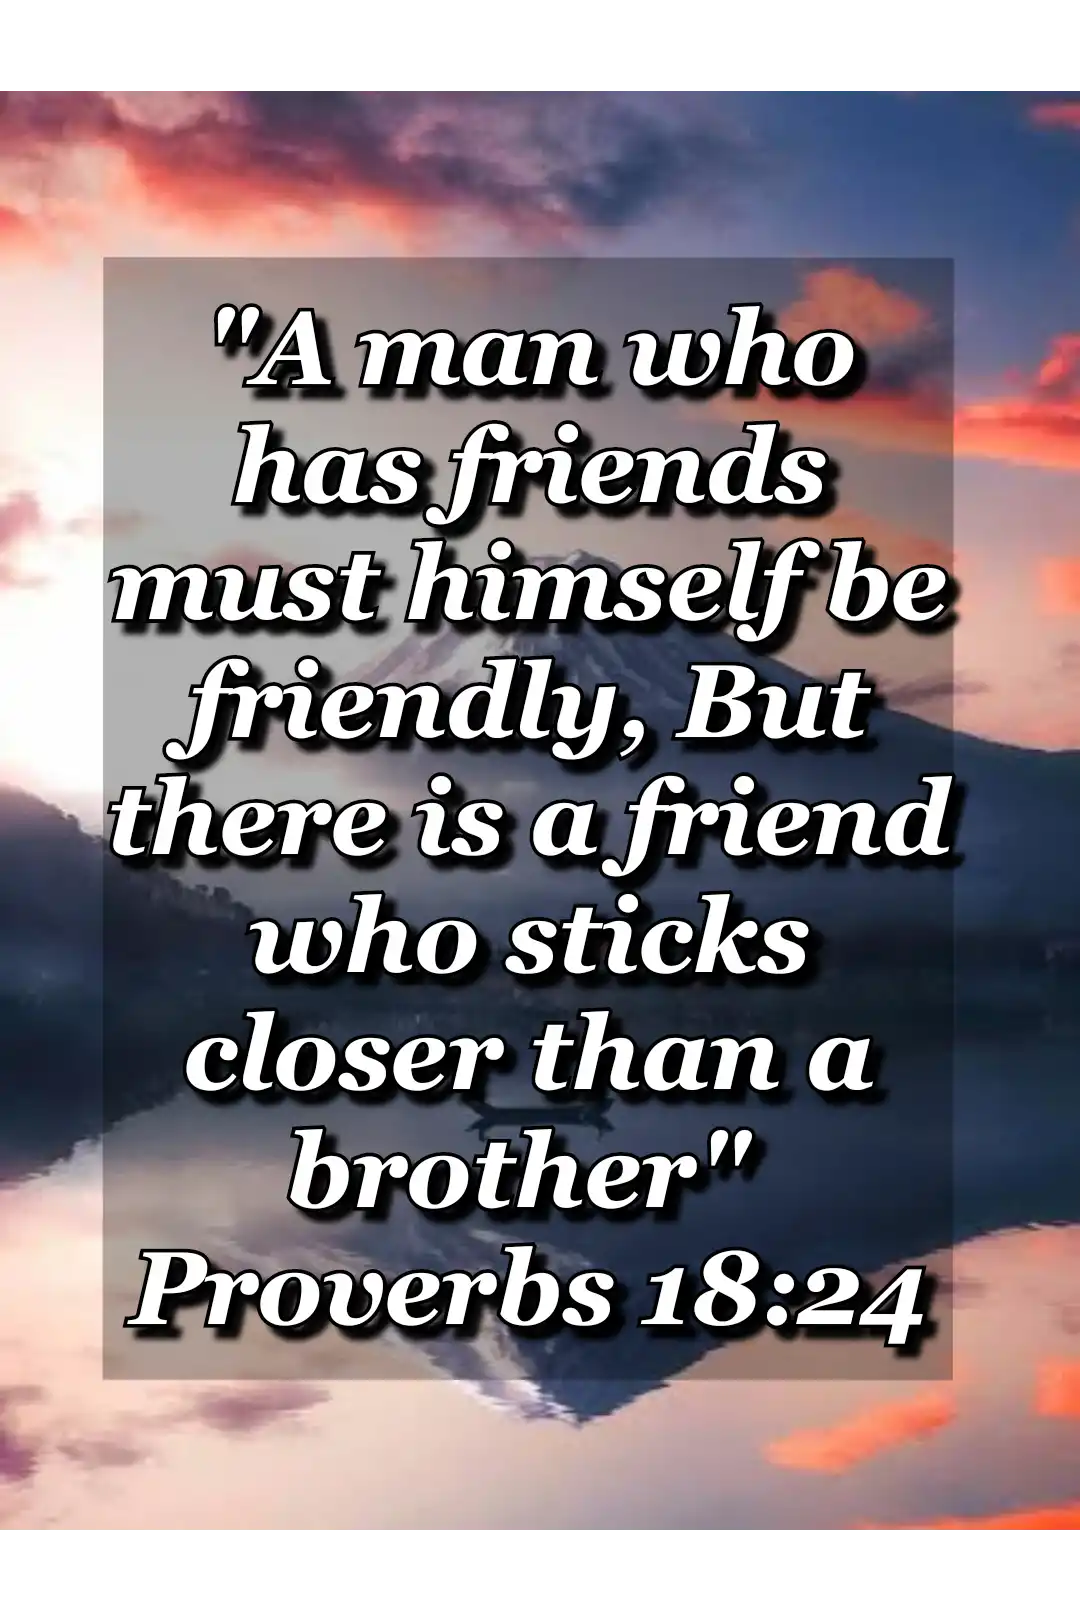 bibile-verses-about-friendship (Proverbs 18:24)